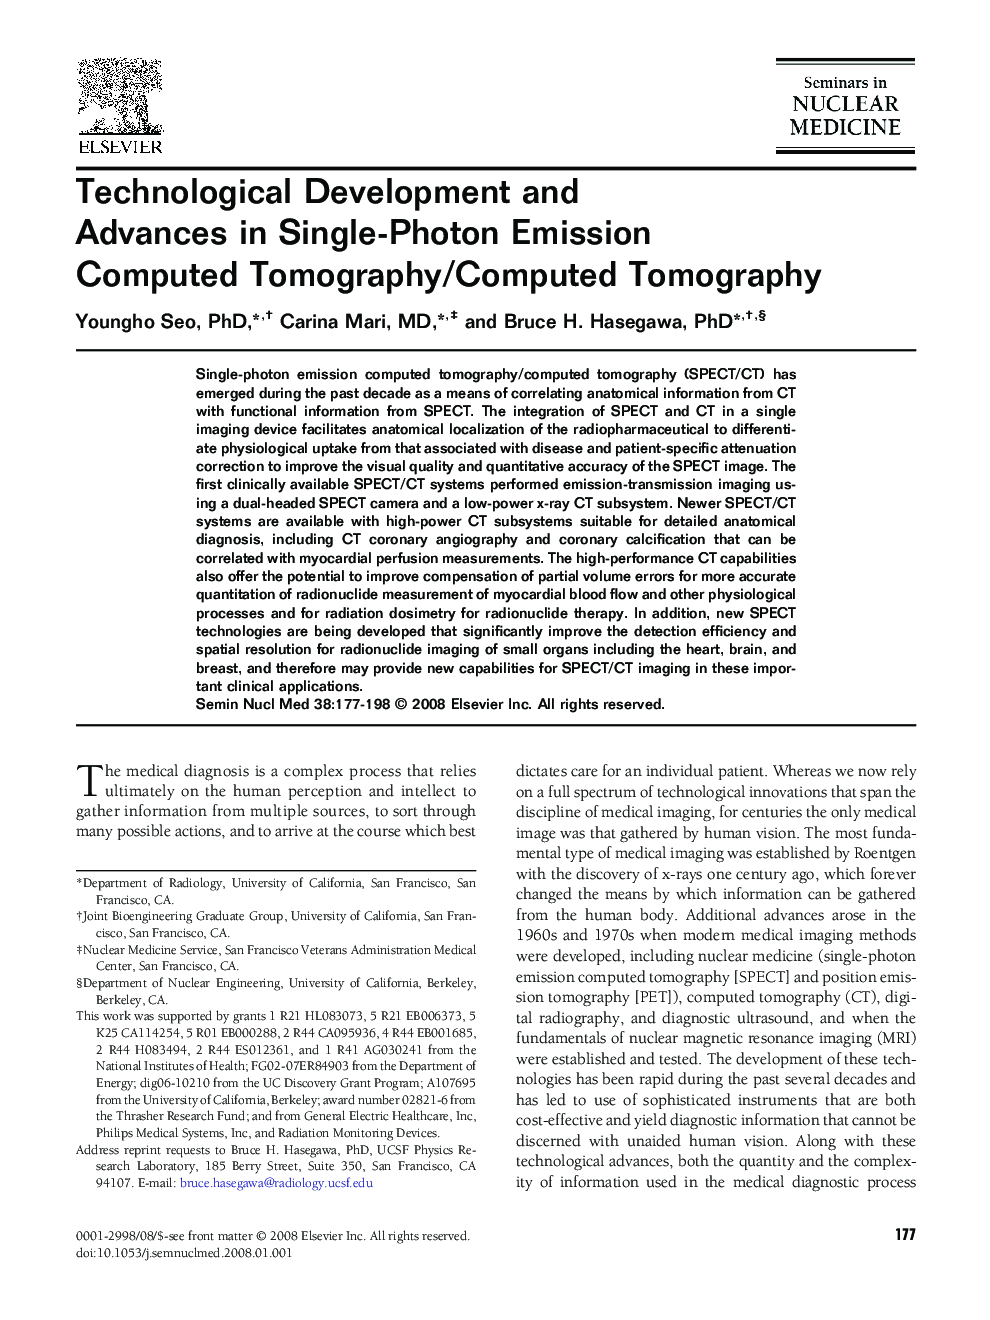 Technological Development and Advances in Single-Photon Emission Computed Tomography/Computed Tomography 